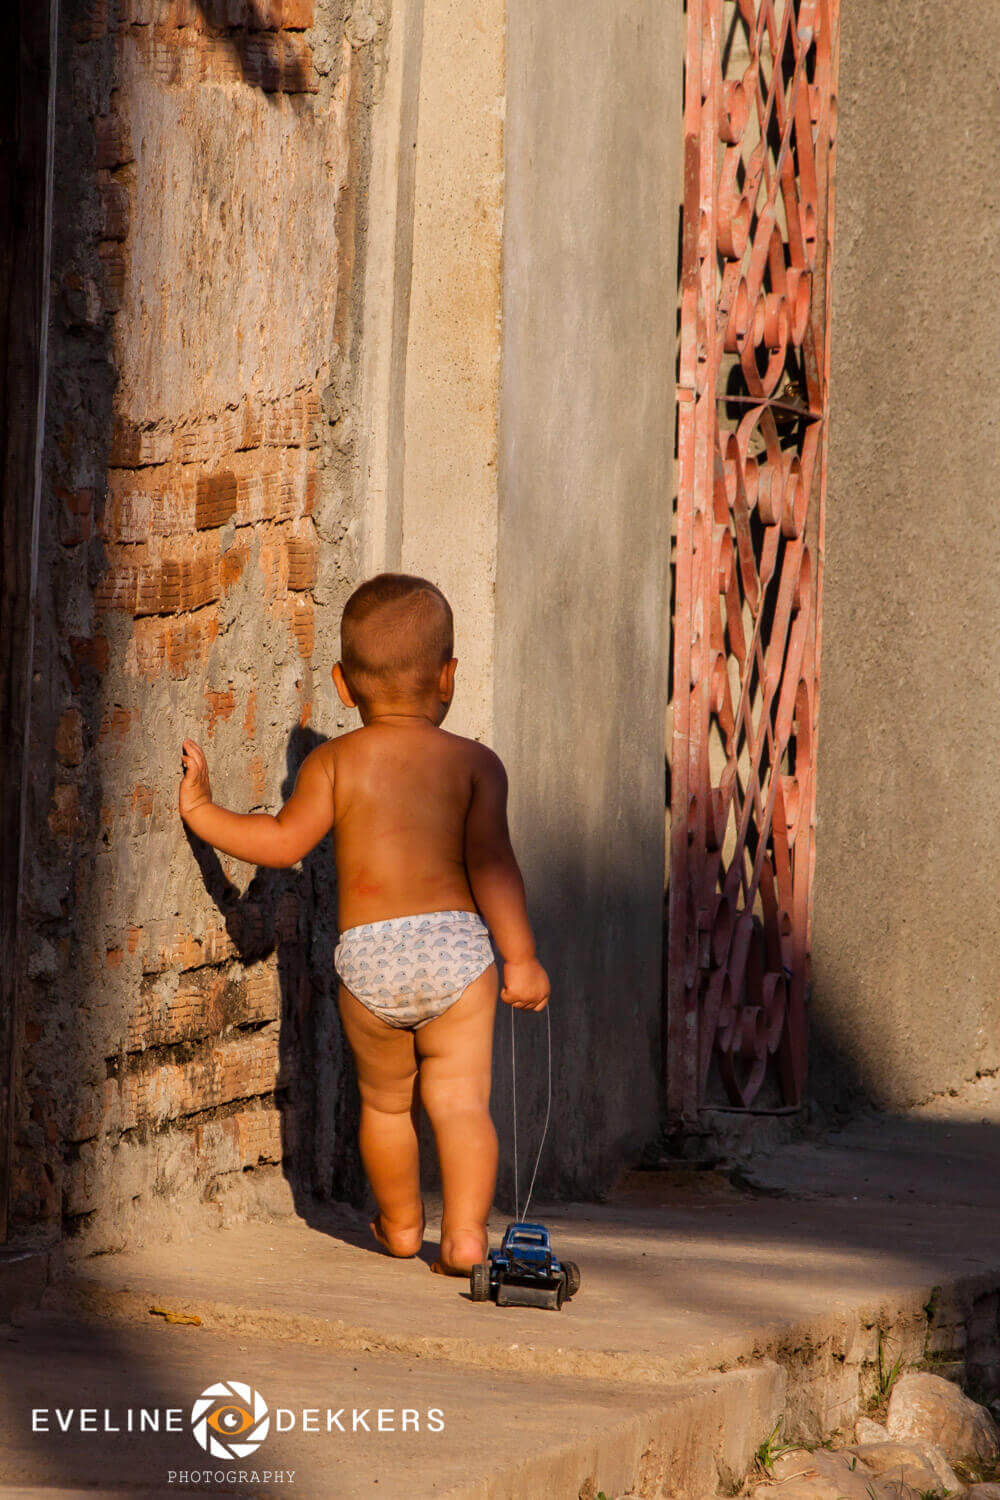 Playing at the streets of Trinidad - Cuba